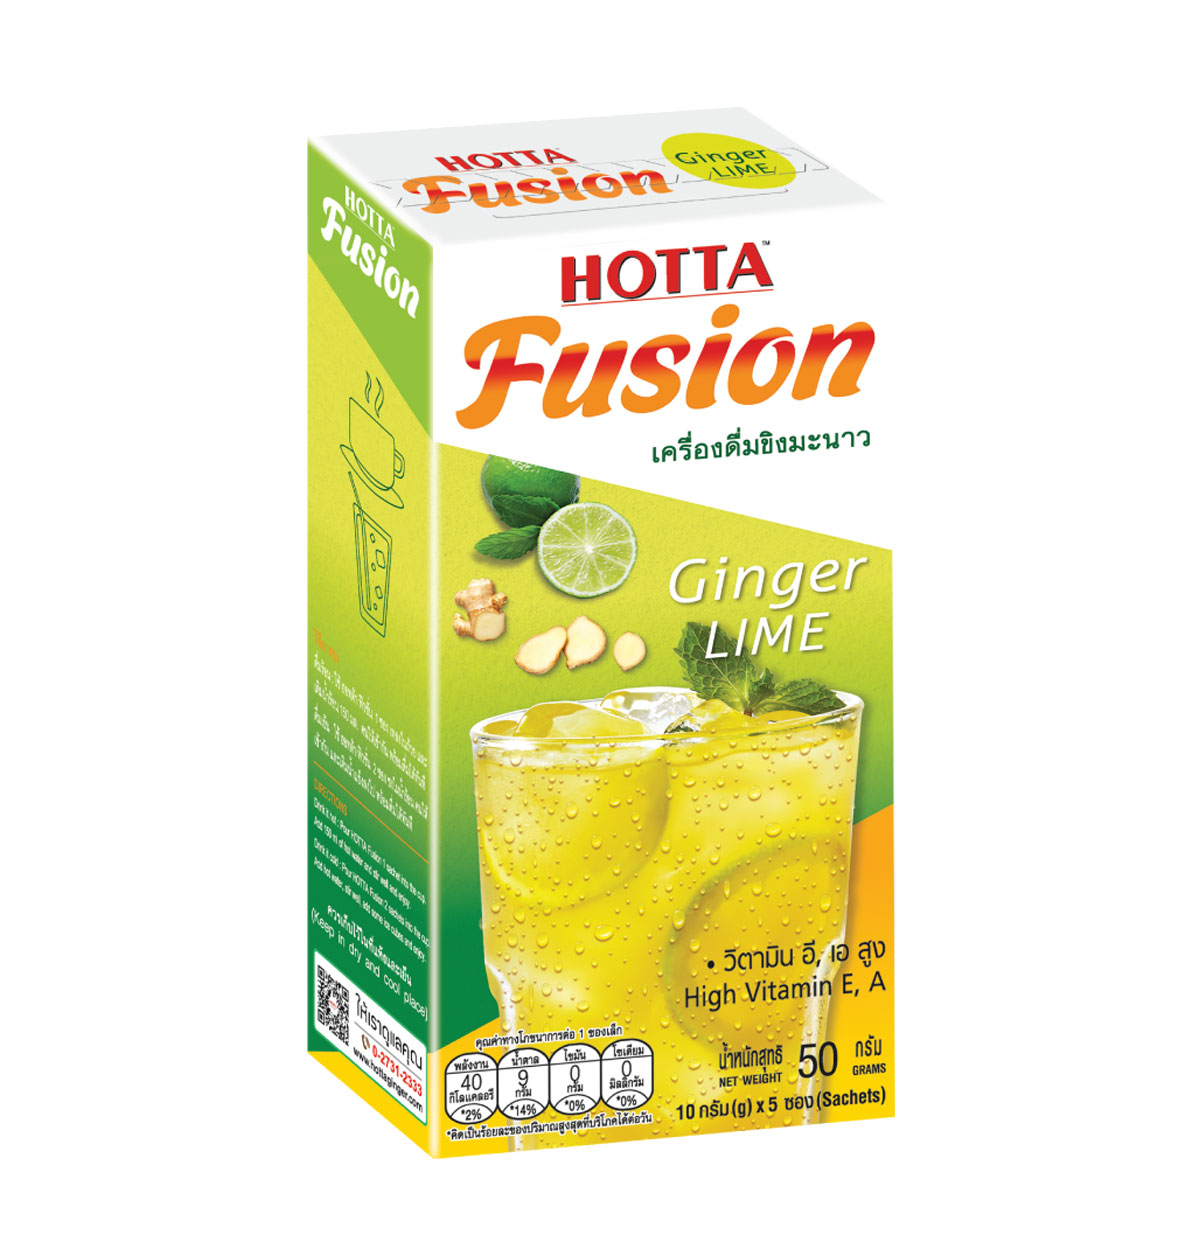 New! HOTTA Fusion Instant Ginger Lime Flavor 10g.x 5 Sachets